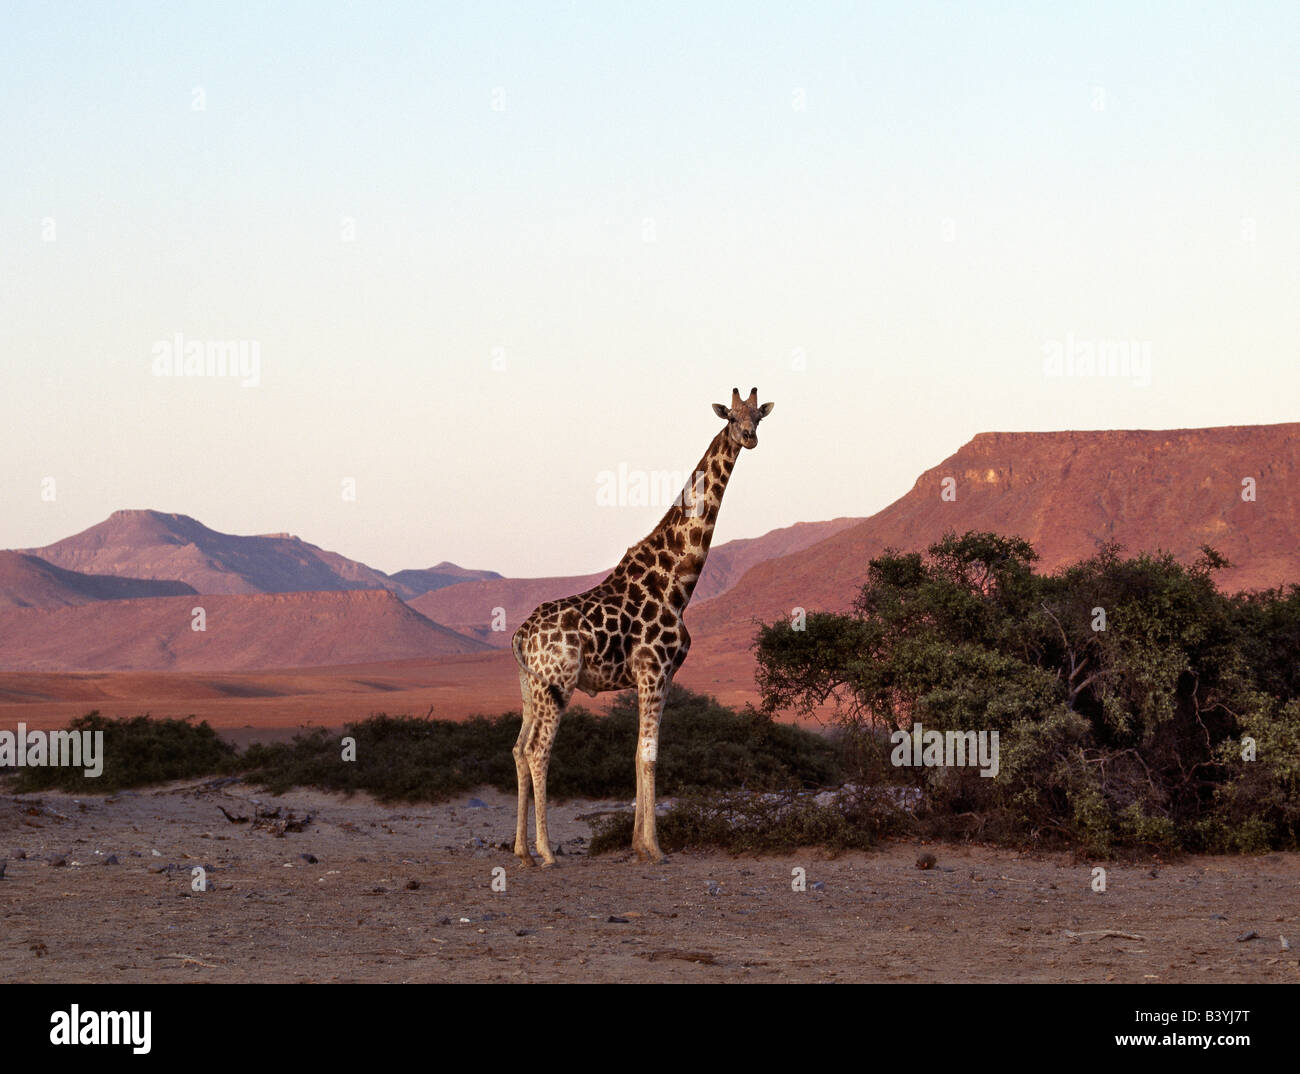 Namibia, Kunene, Skeleton Coast Park. At sunset, a lone giraffe towers above the scant vegetation of a seasonal watercourse in the starkly beautiful rugged scenery of Namibia's remote Skeleton Coast Park. Stock Photo